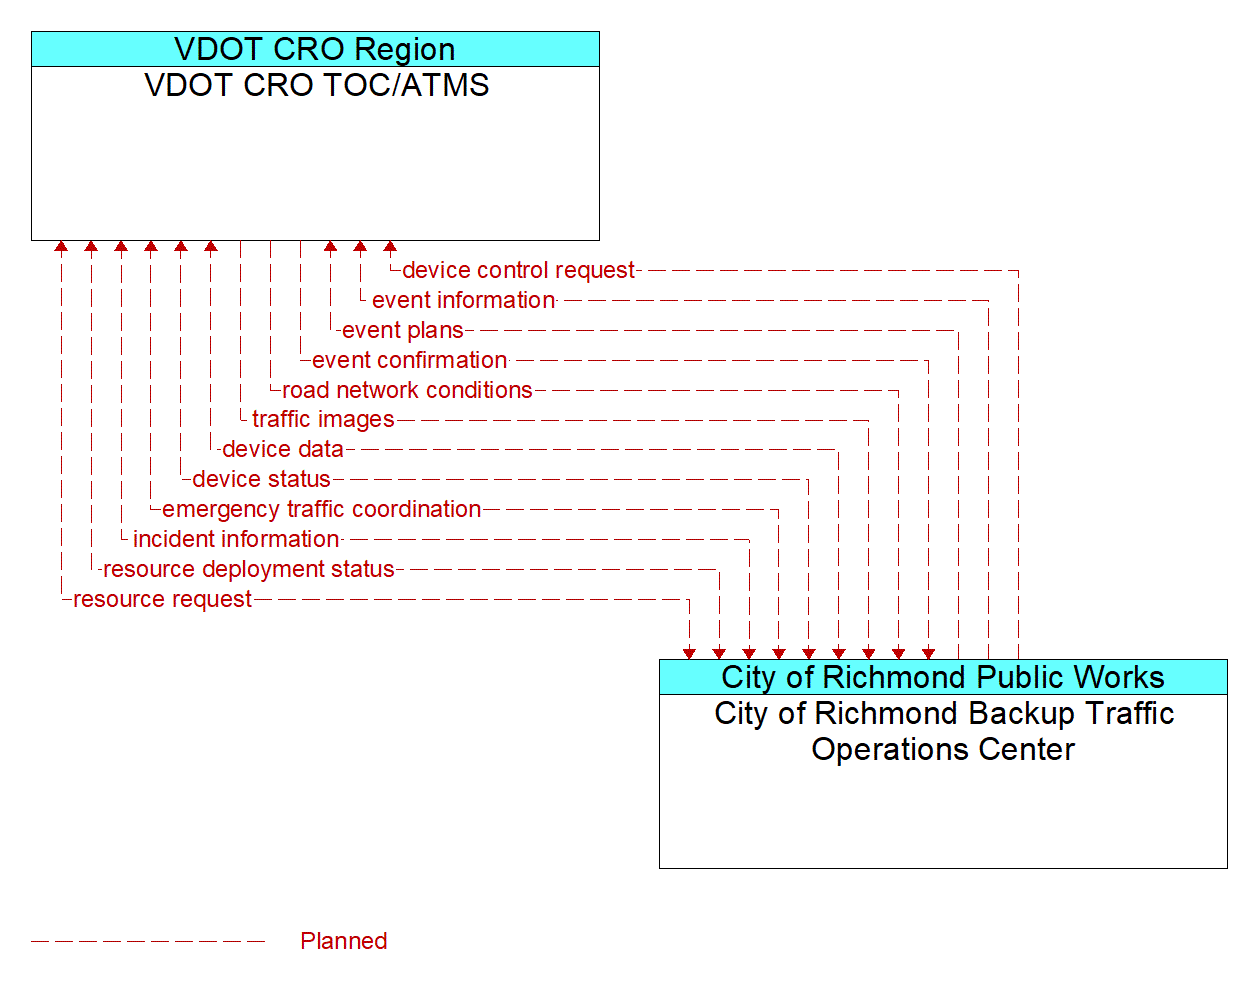 Architecture Flow Diagram: City of Richmond Backup Traffic Operations Center <--> VDOT CRO TOC/ATMS